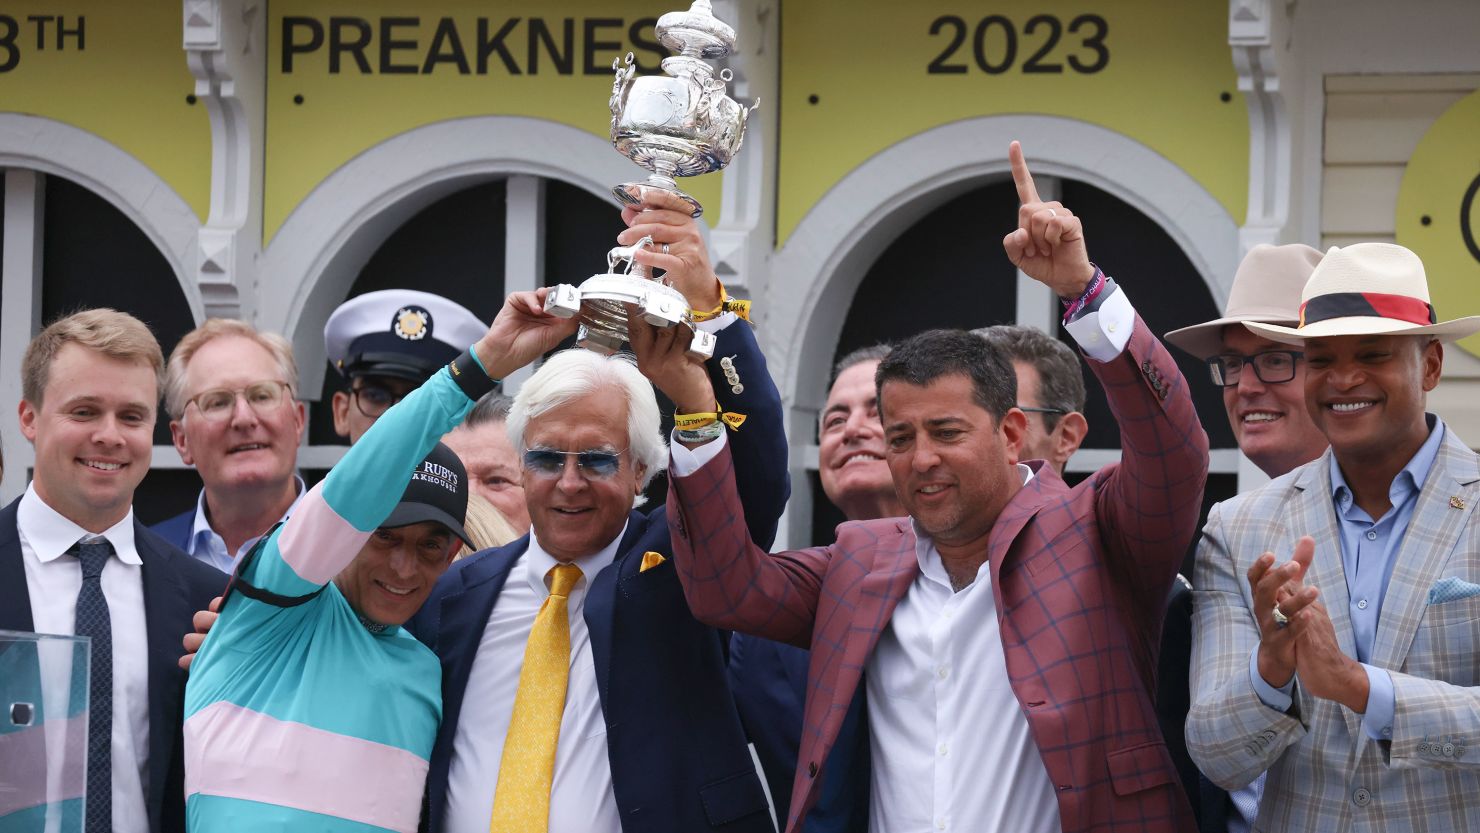 The silver-haired Bob Baffert trained National Treasure,who won the Preakness Stakes on Saturday.